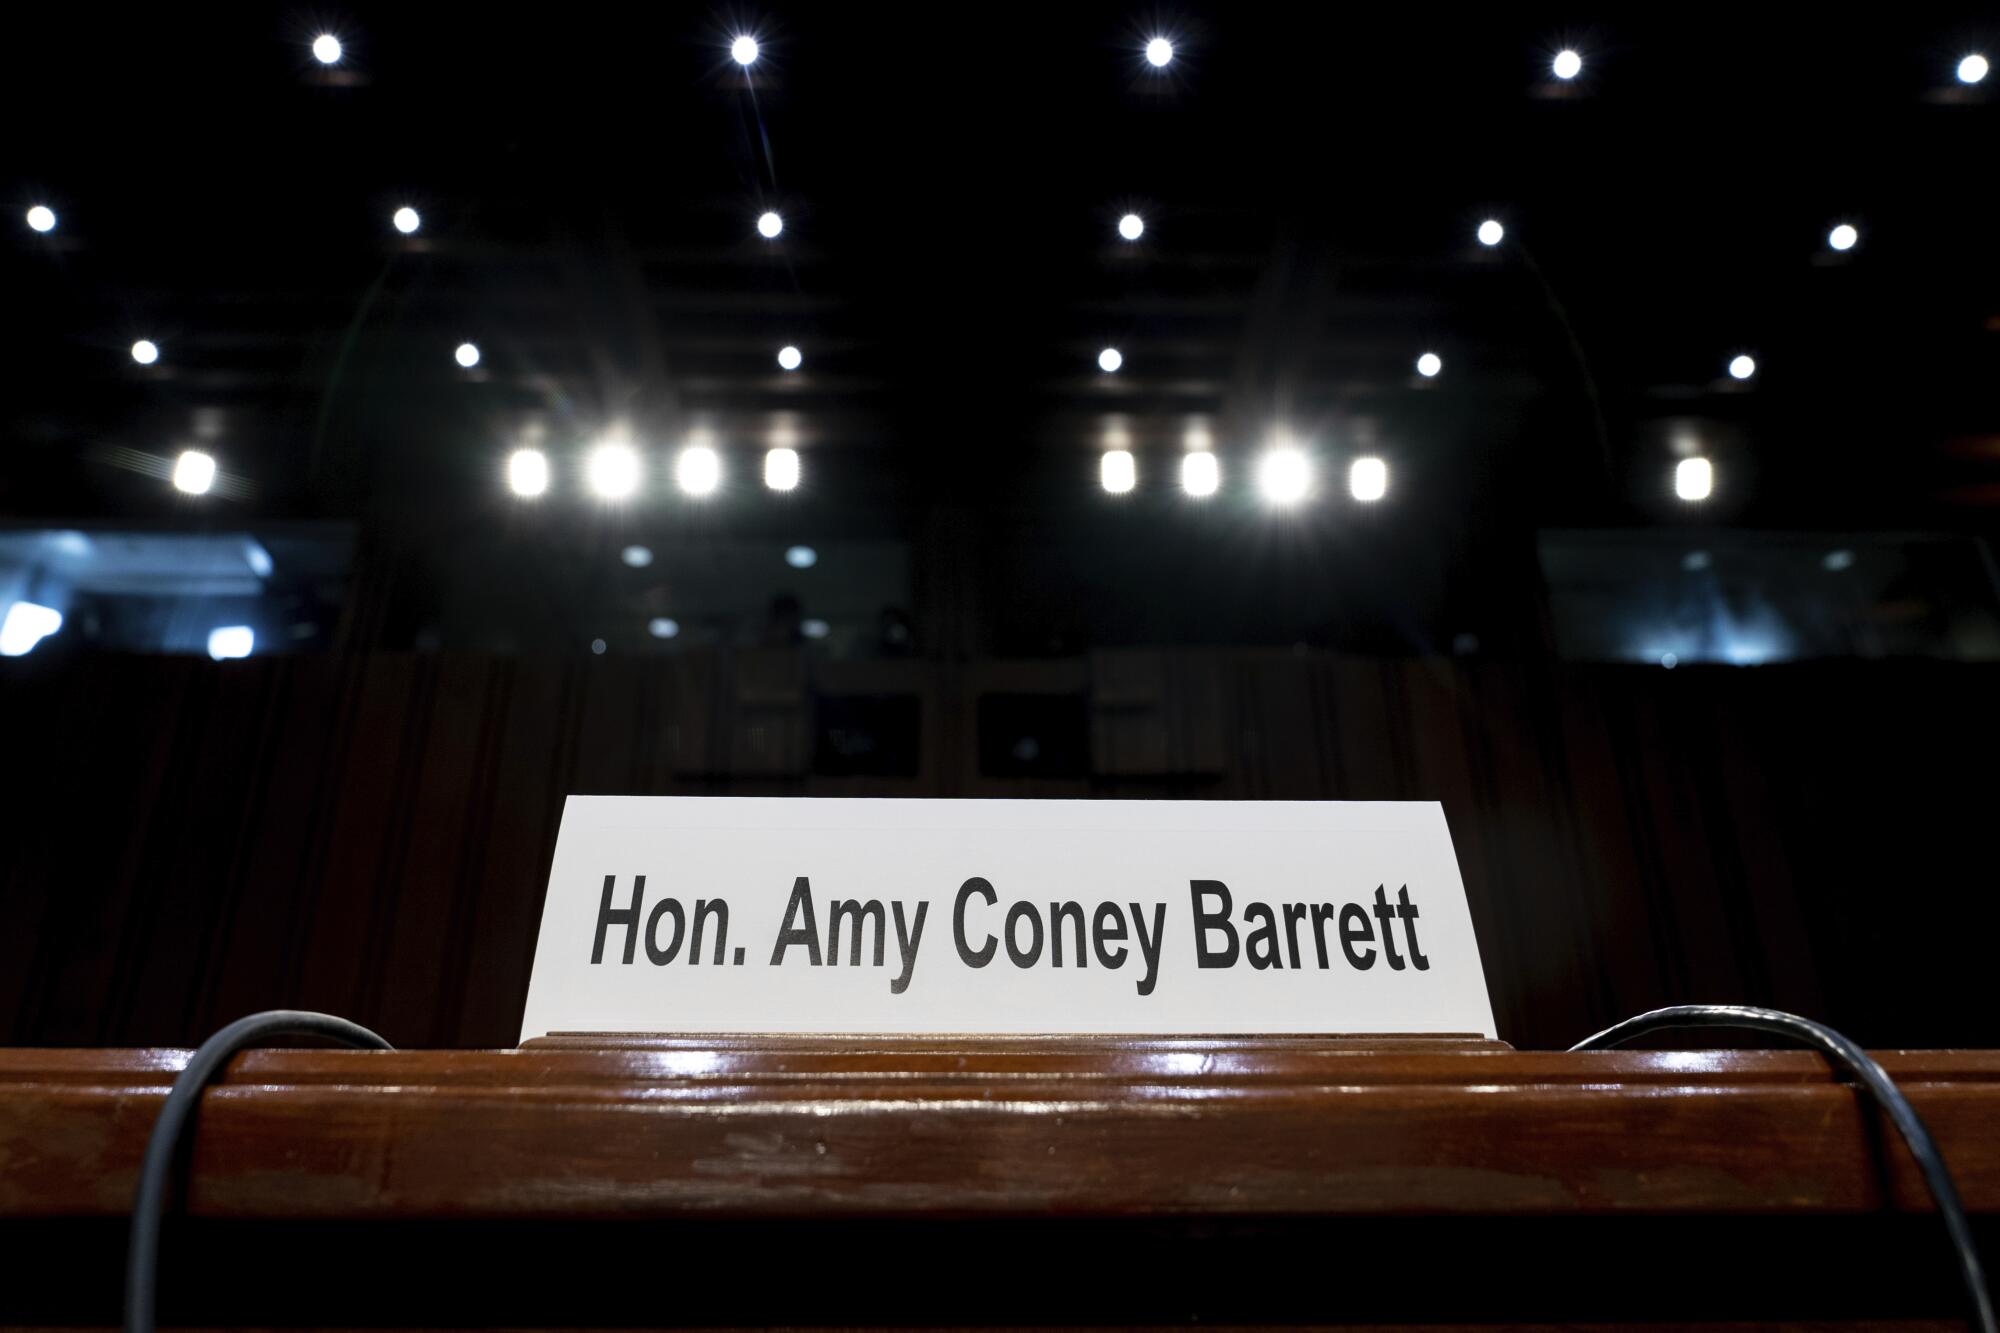 A namecard for Supreme Court nominee Amy Coney Barrett rests on a desk.